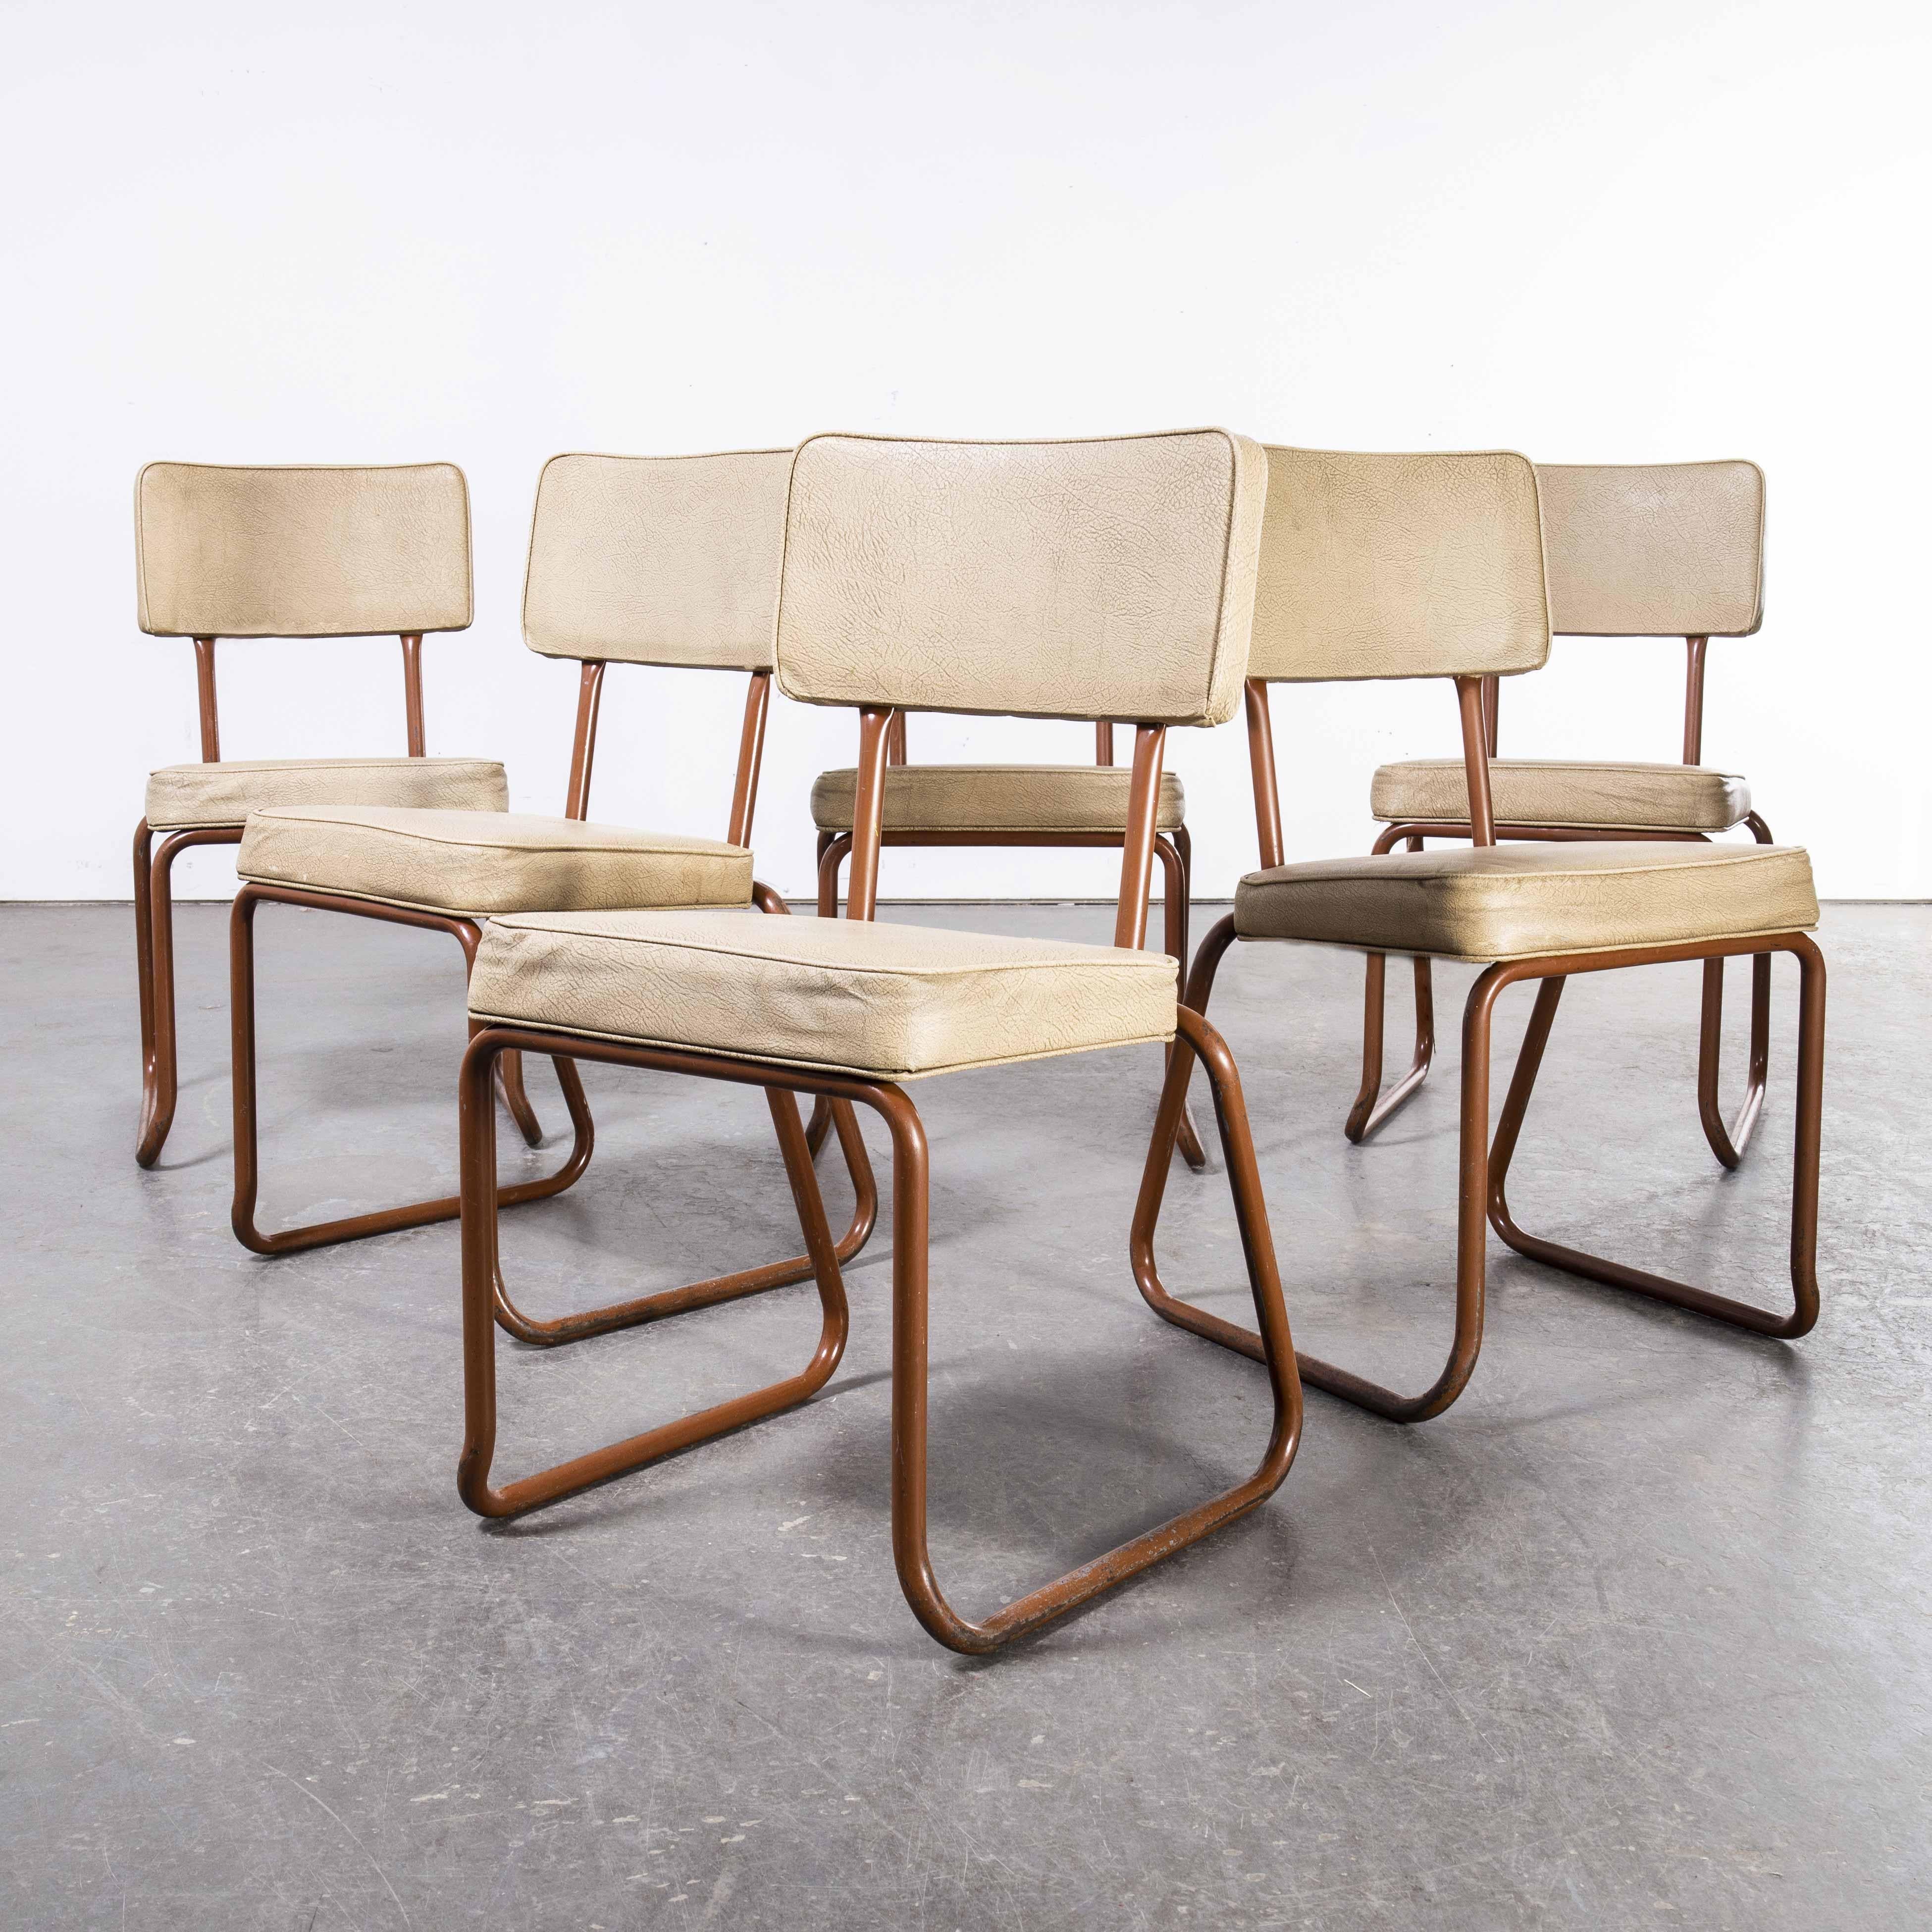 1970’s Cox Tubular metal upholstered dining chairs set of six
1970’s Cox Tubular metal upholstered dining chairs set of six. Cox chairs are a British essential and this set was an incredible find in exceptional original condition, all with Cox